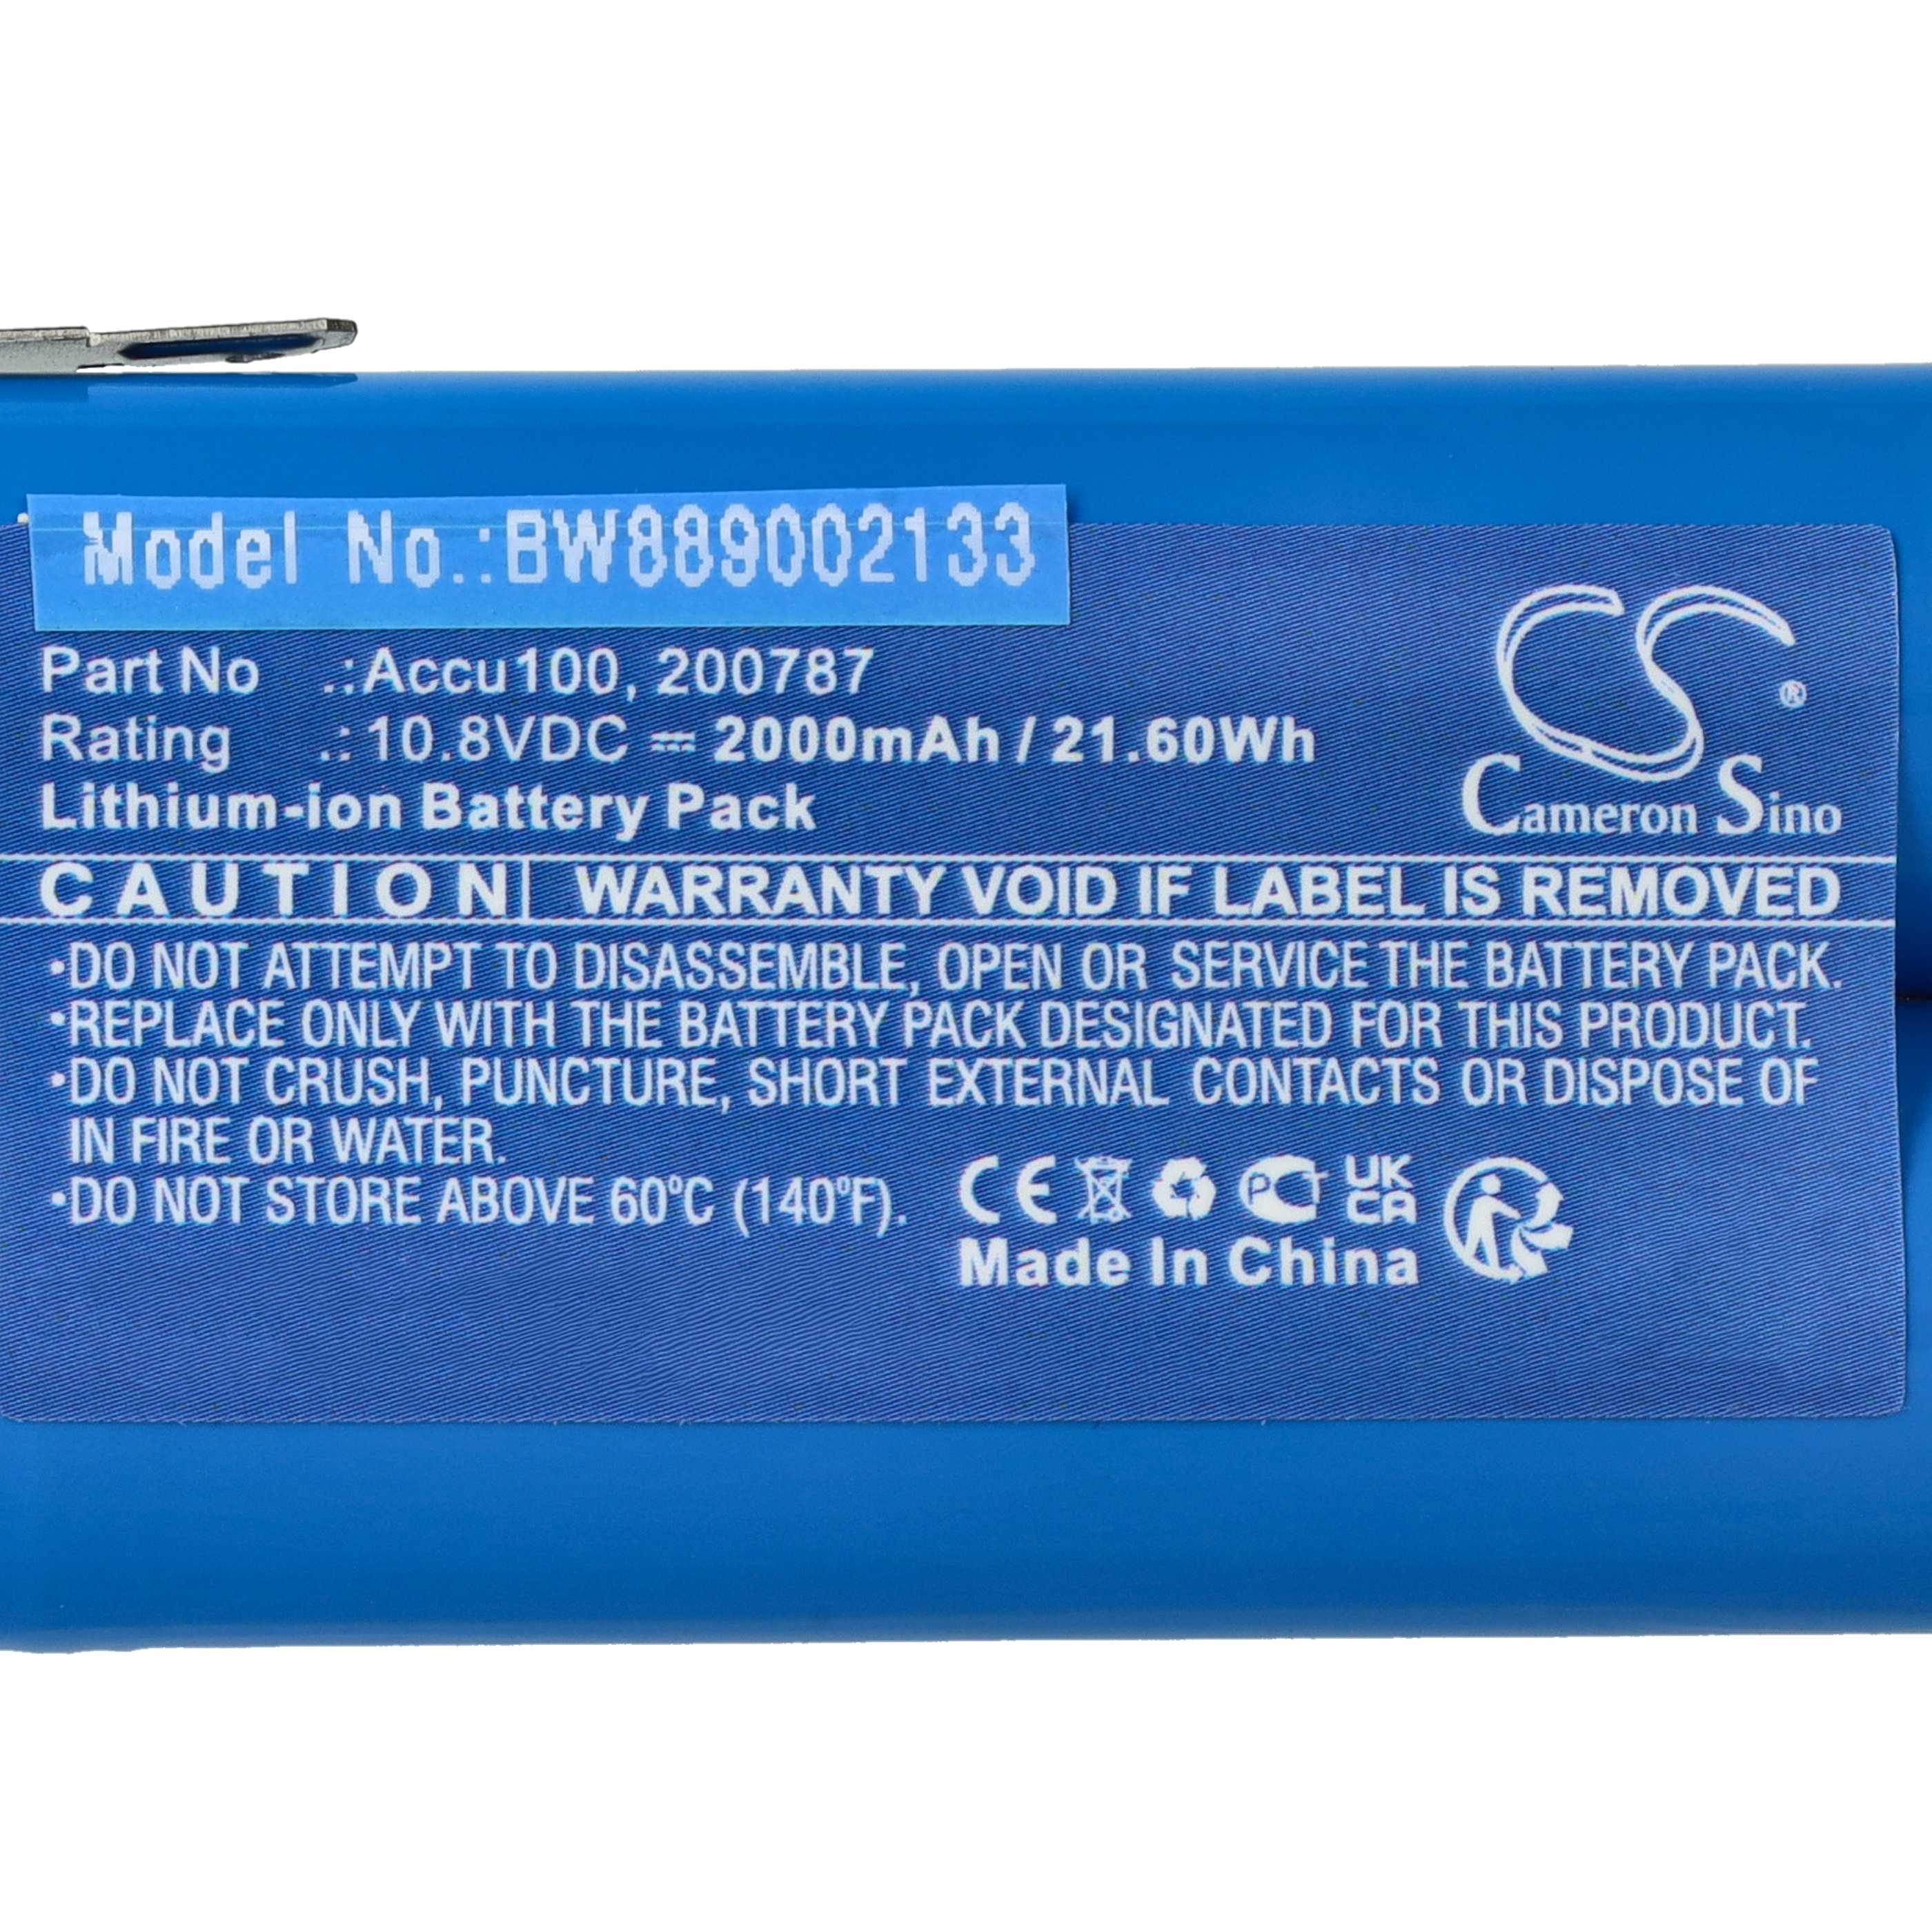 Lawnmower Battery Replacement for Bosch 08830-00.640.00, 08804-00.640.00 - 4200mAh 11.1V Li-Ion